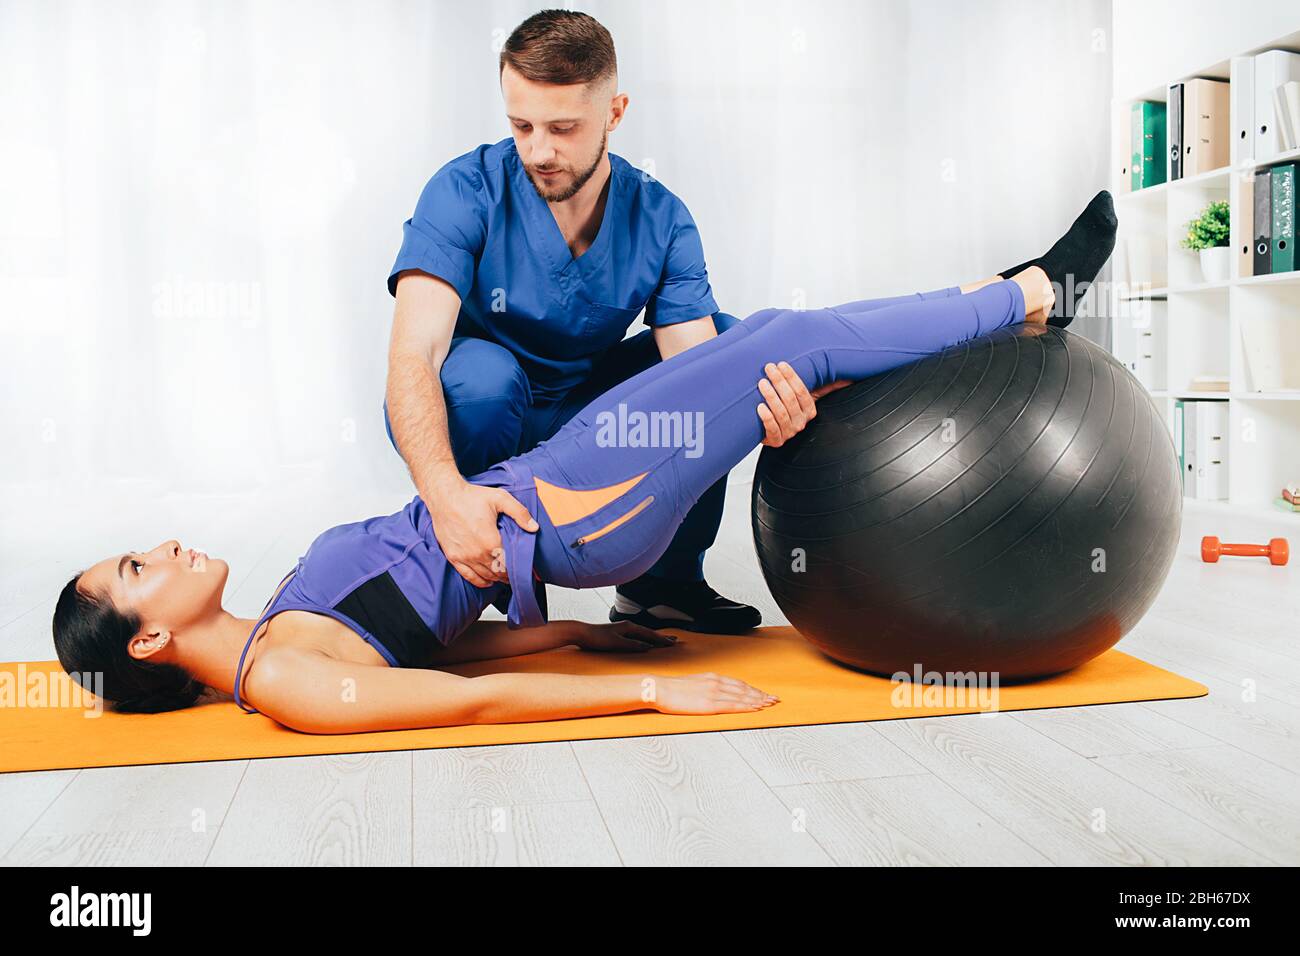 Physical therapist helping his patient doing exercise. Woman laying on mat and doing exercise with pilates ball Stock Photo